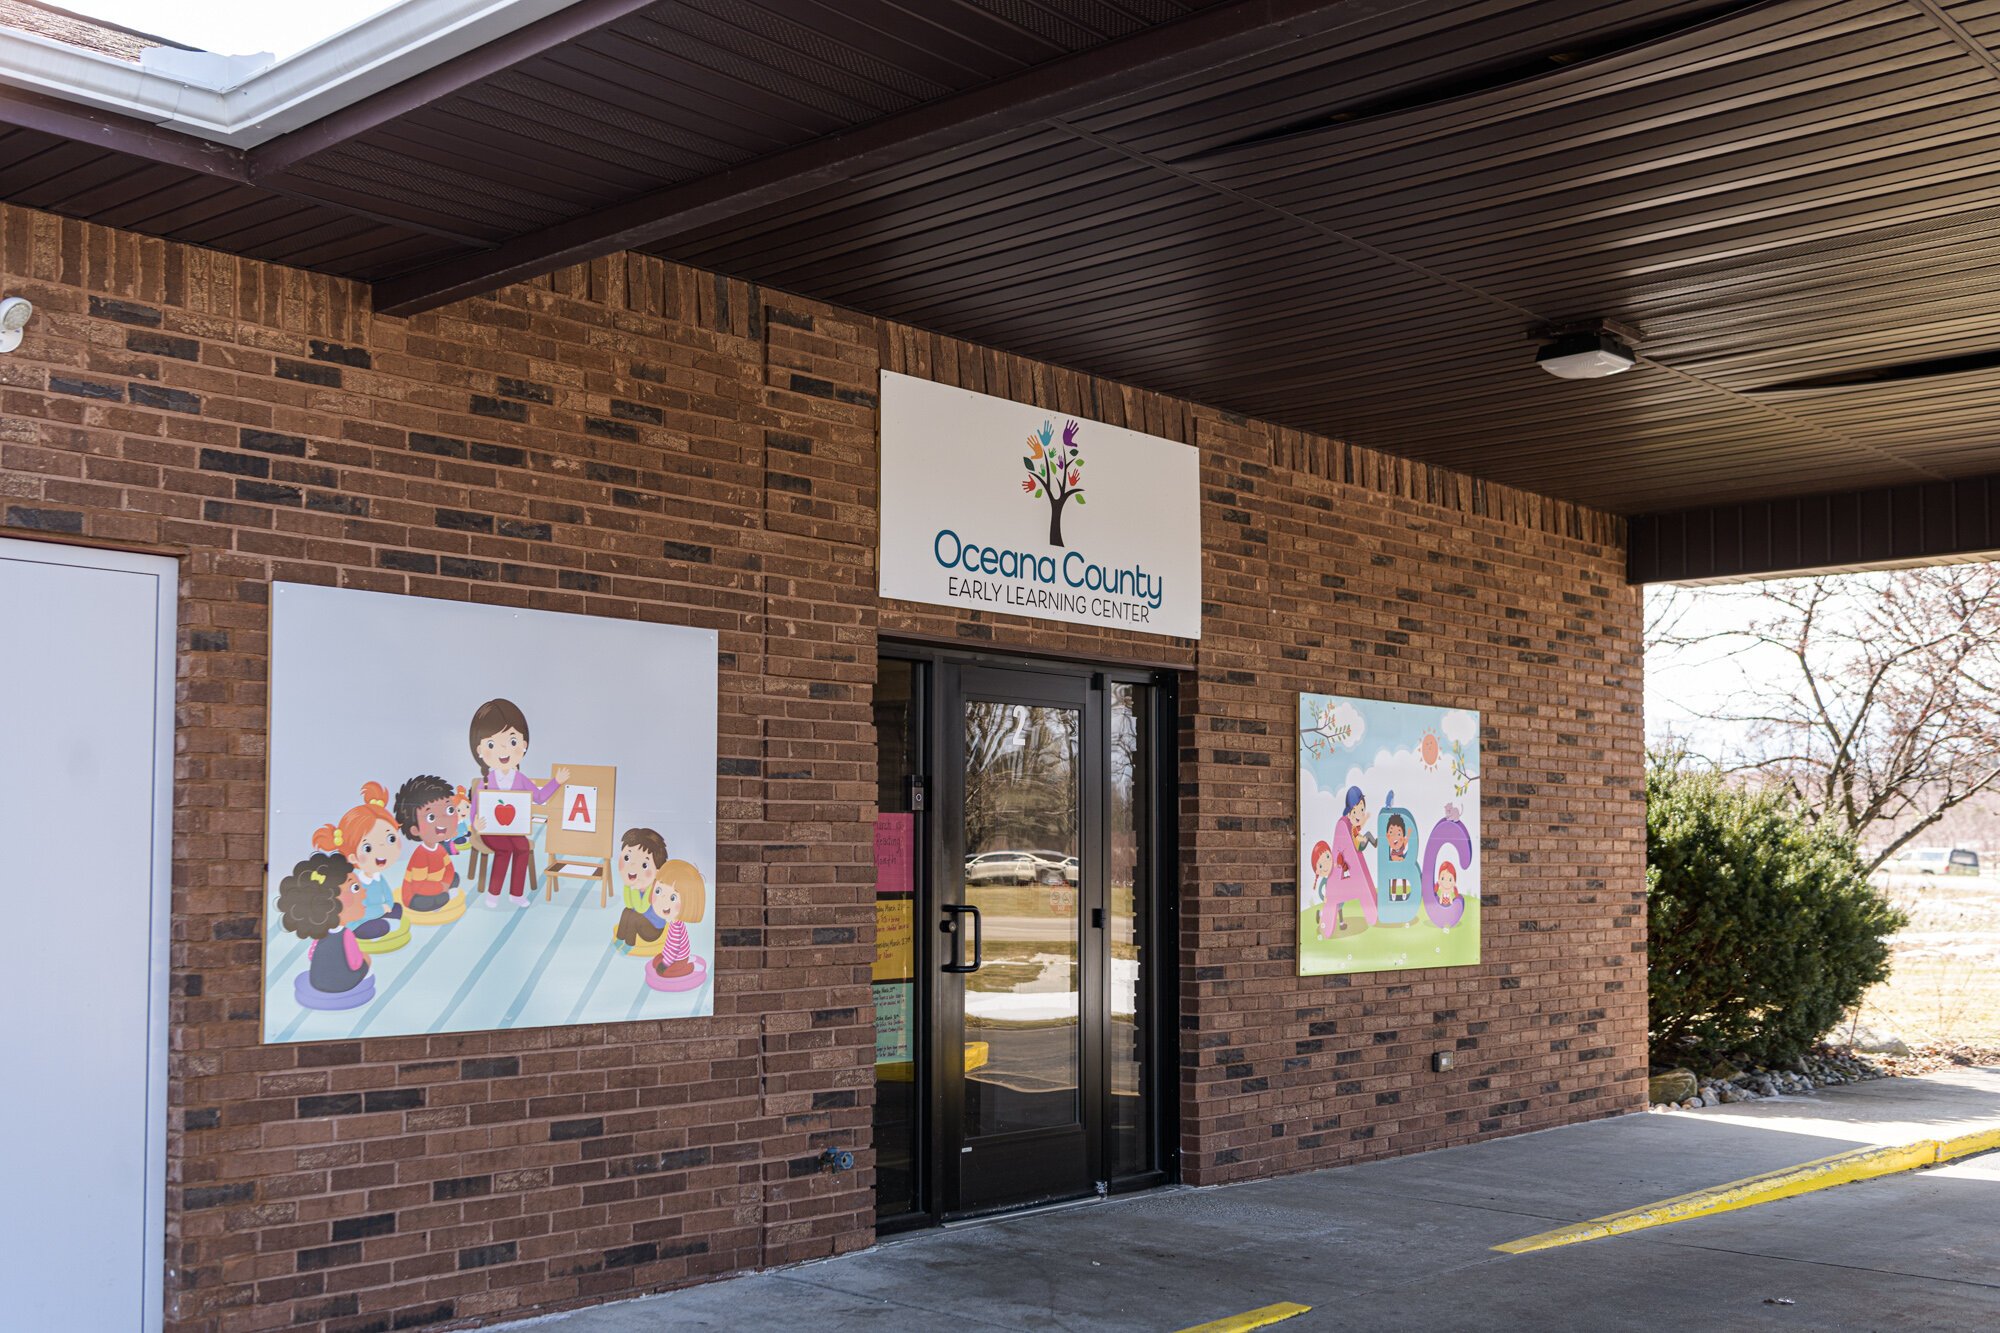 This daycare was one of two in Oceana County that the community foundation partnered with. 